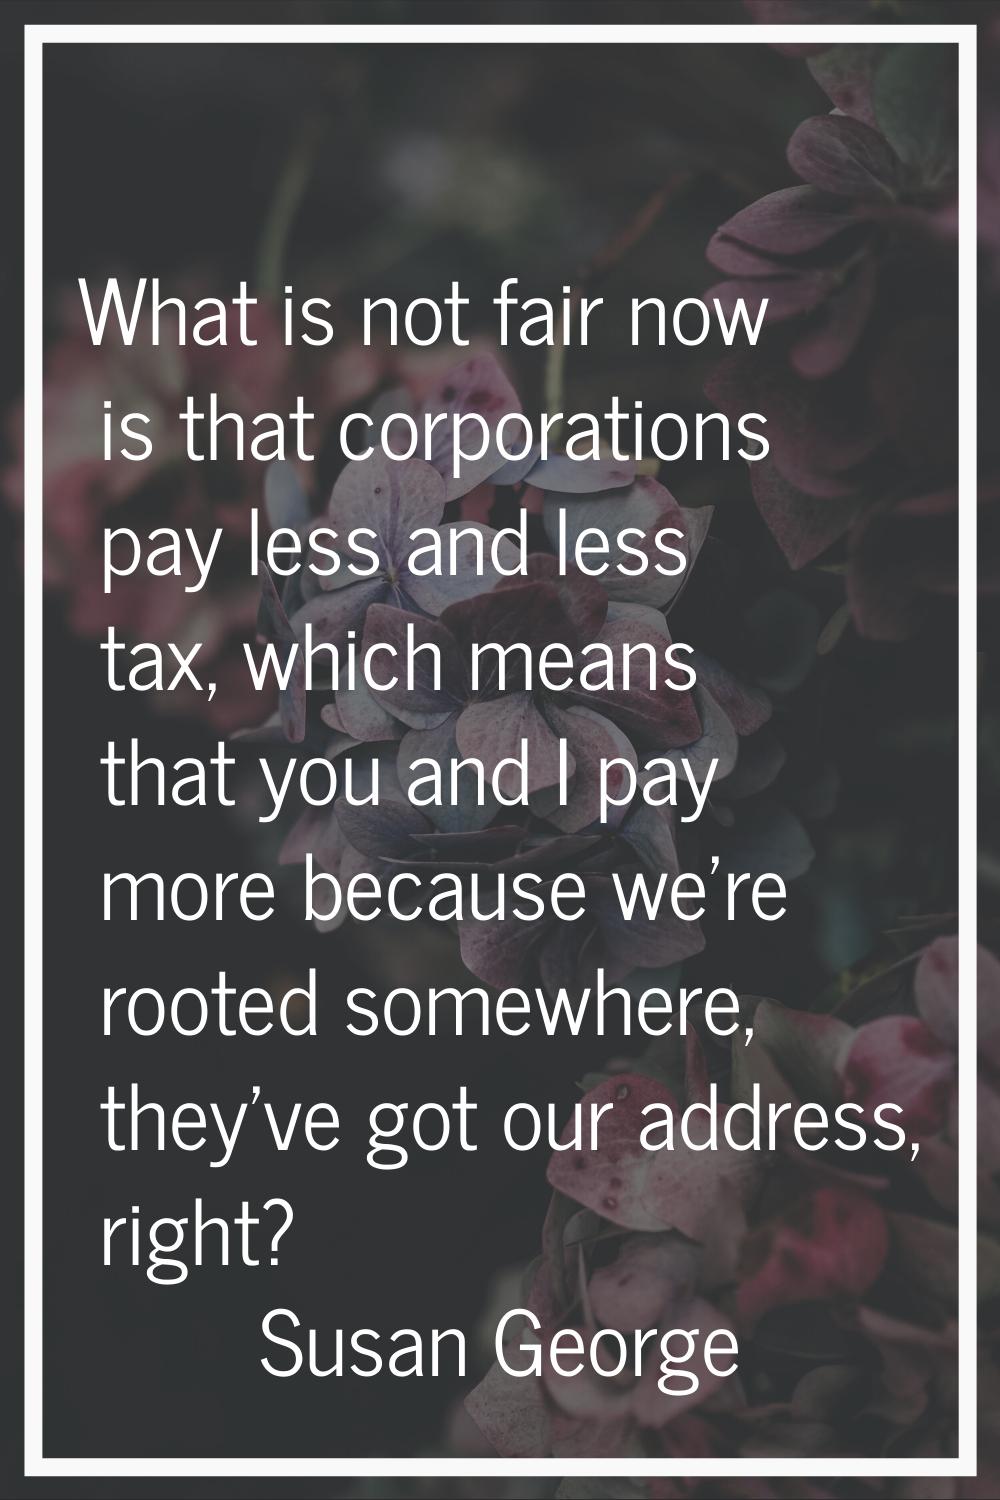 What is not fair now is that corporations pay less and less tax, which means that you and I pay mor